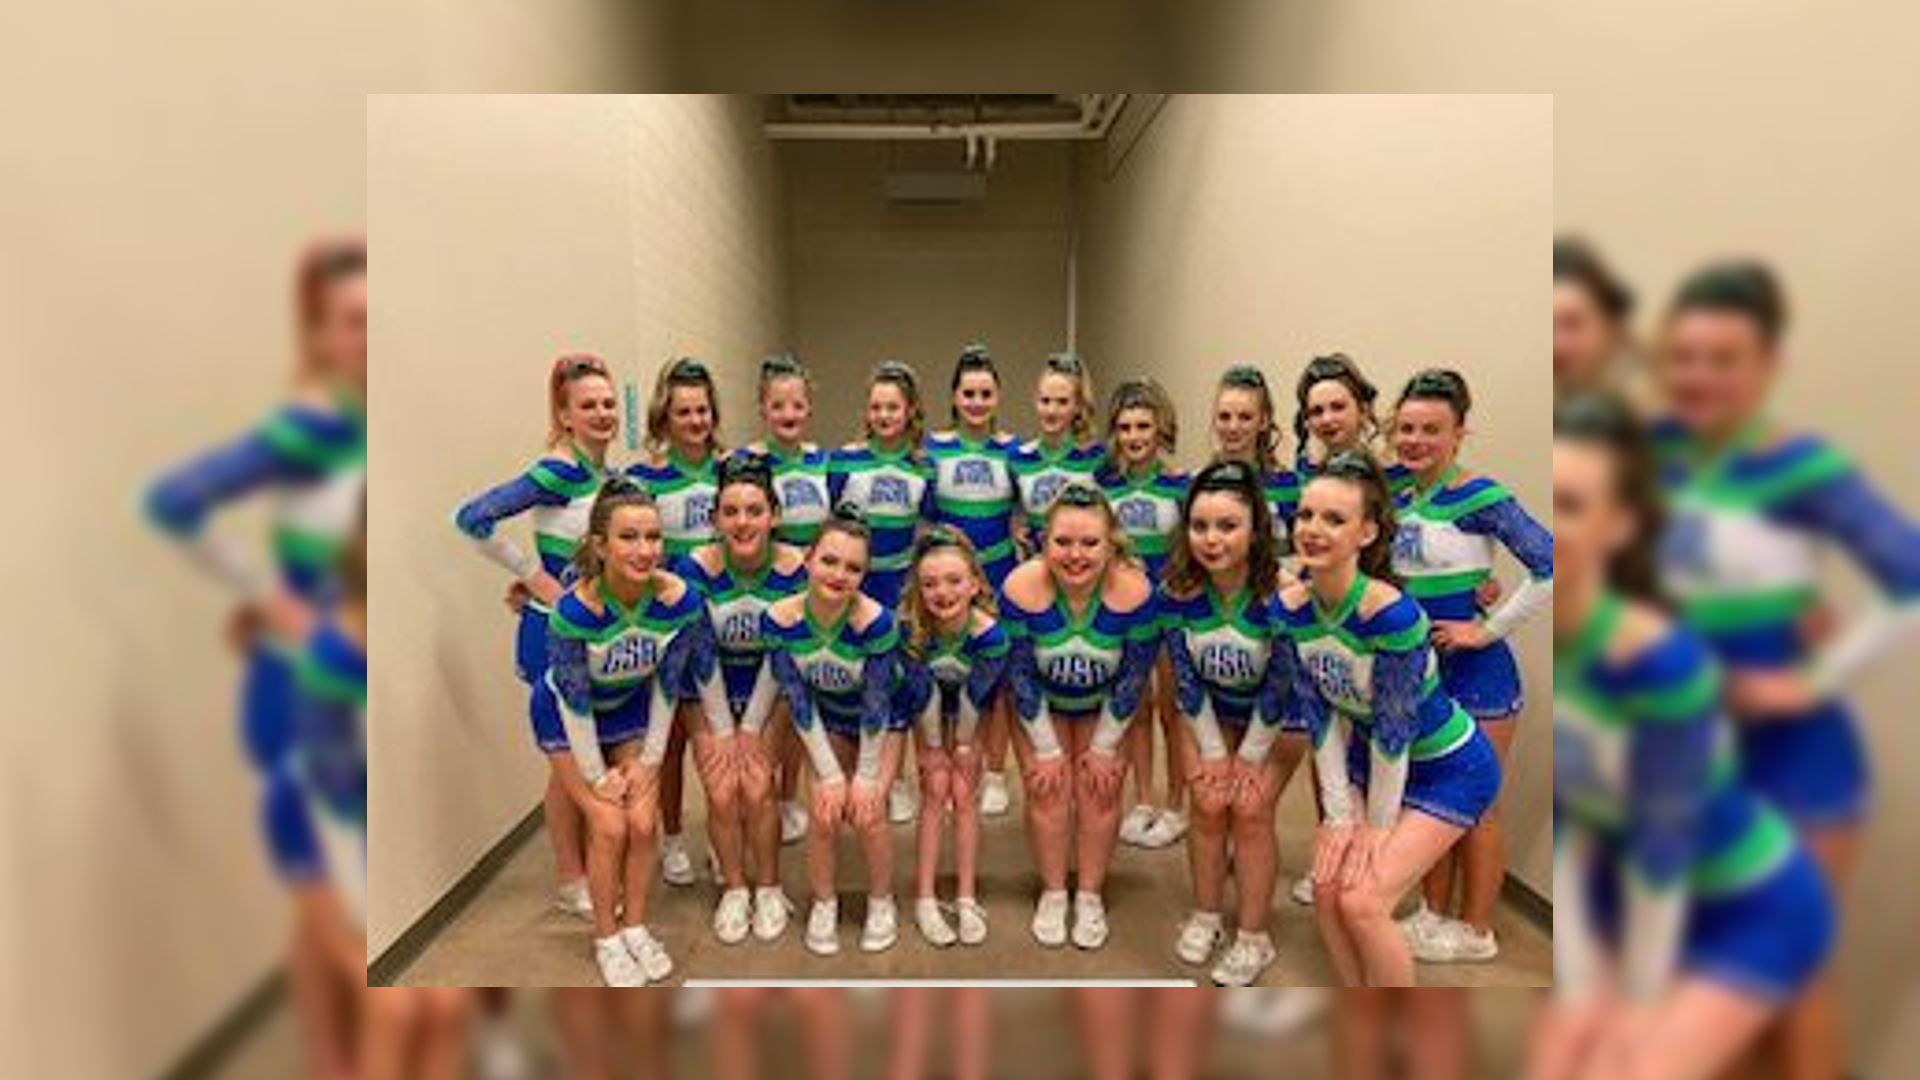 Southern Athletics - PEACHES [2022] 2022 CHEERSPORT National Cheerleading  Championship